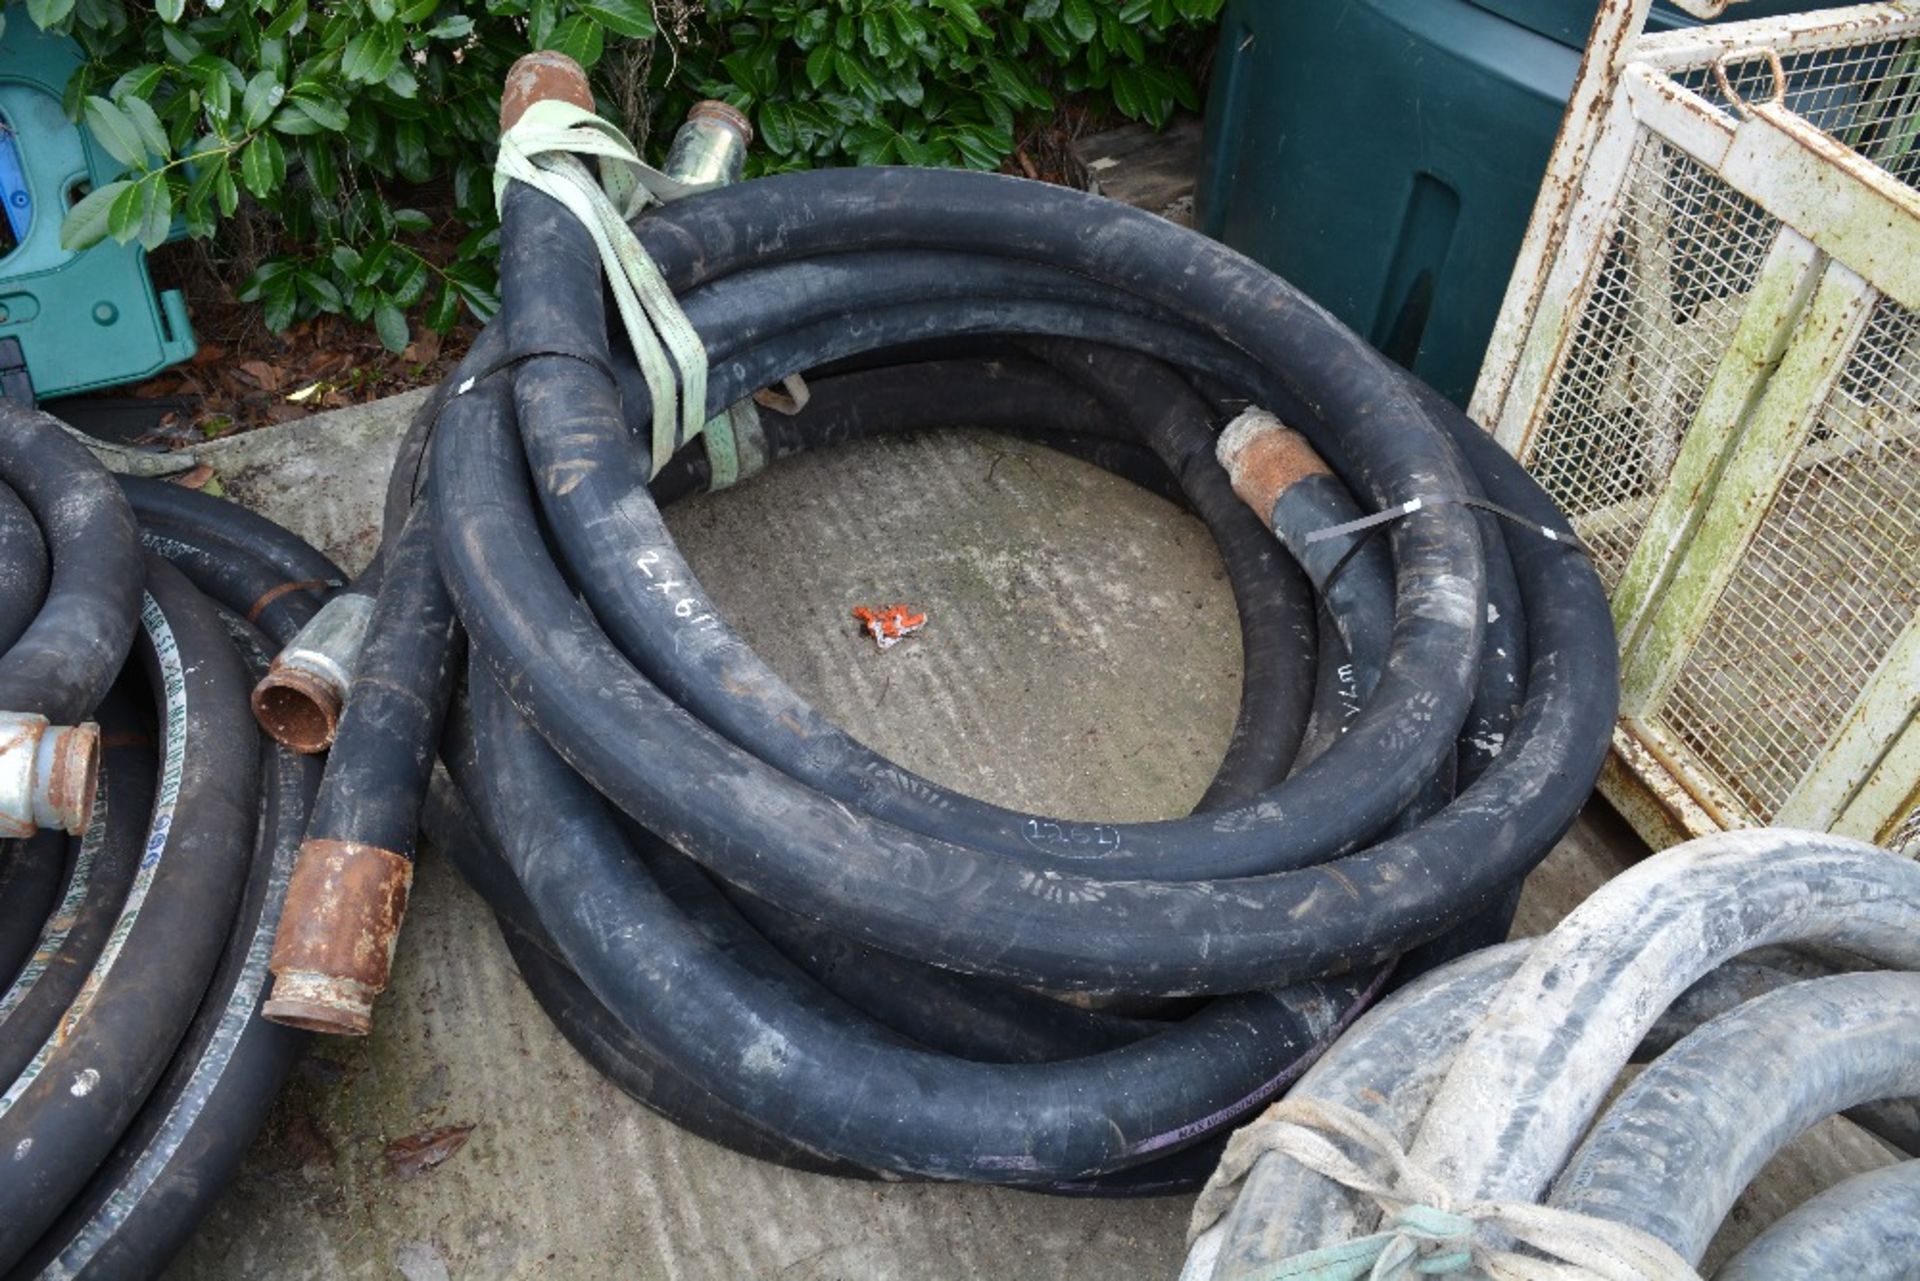 4'' CONCRETE PIPE (2 OF), 6M LENGTHS, ID: PL-15653, RUISLIP PLANT HIRE LTD. *UNRESERVED*